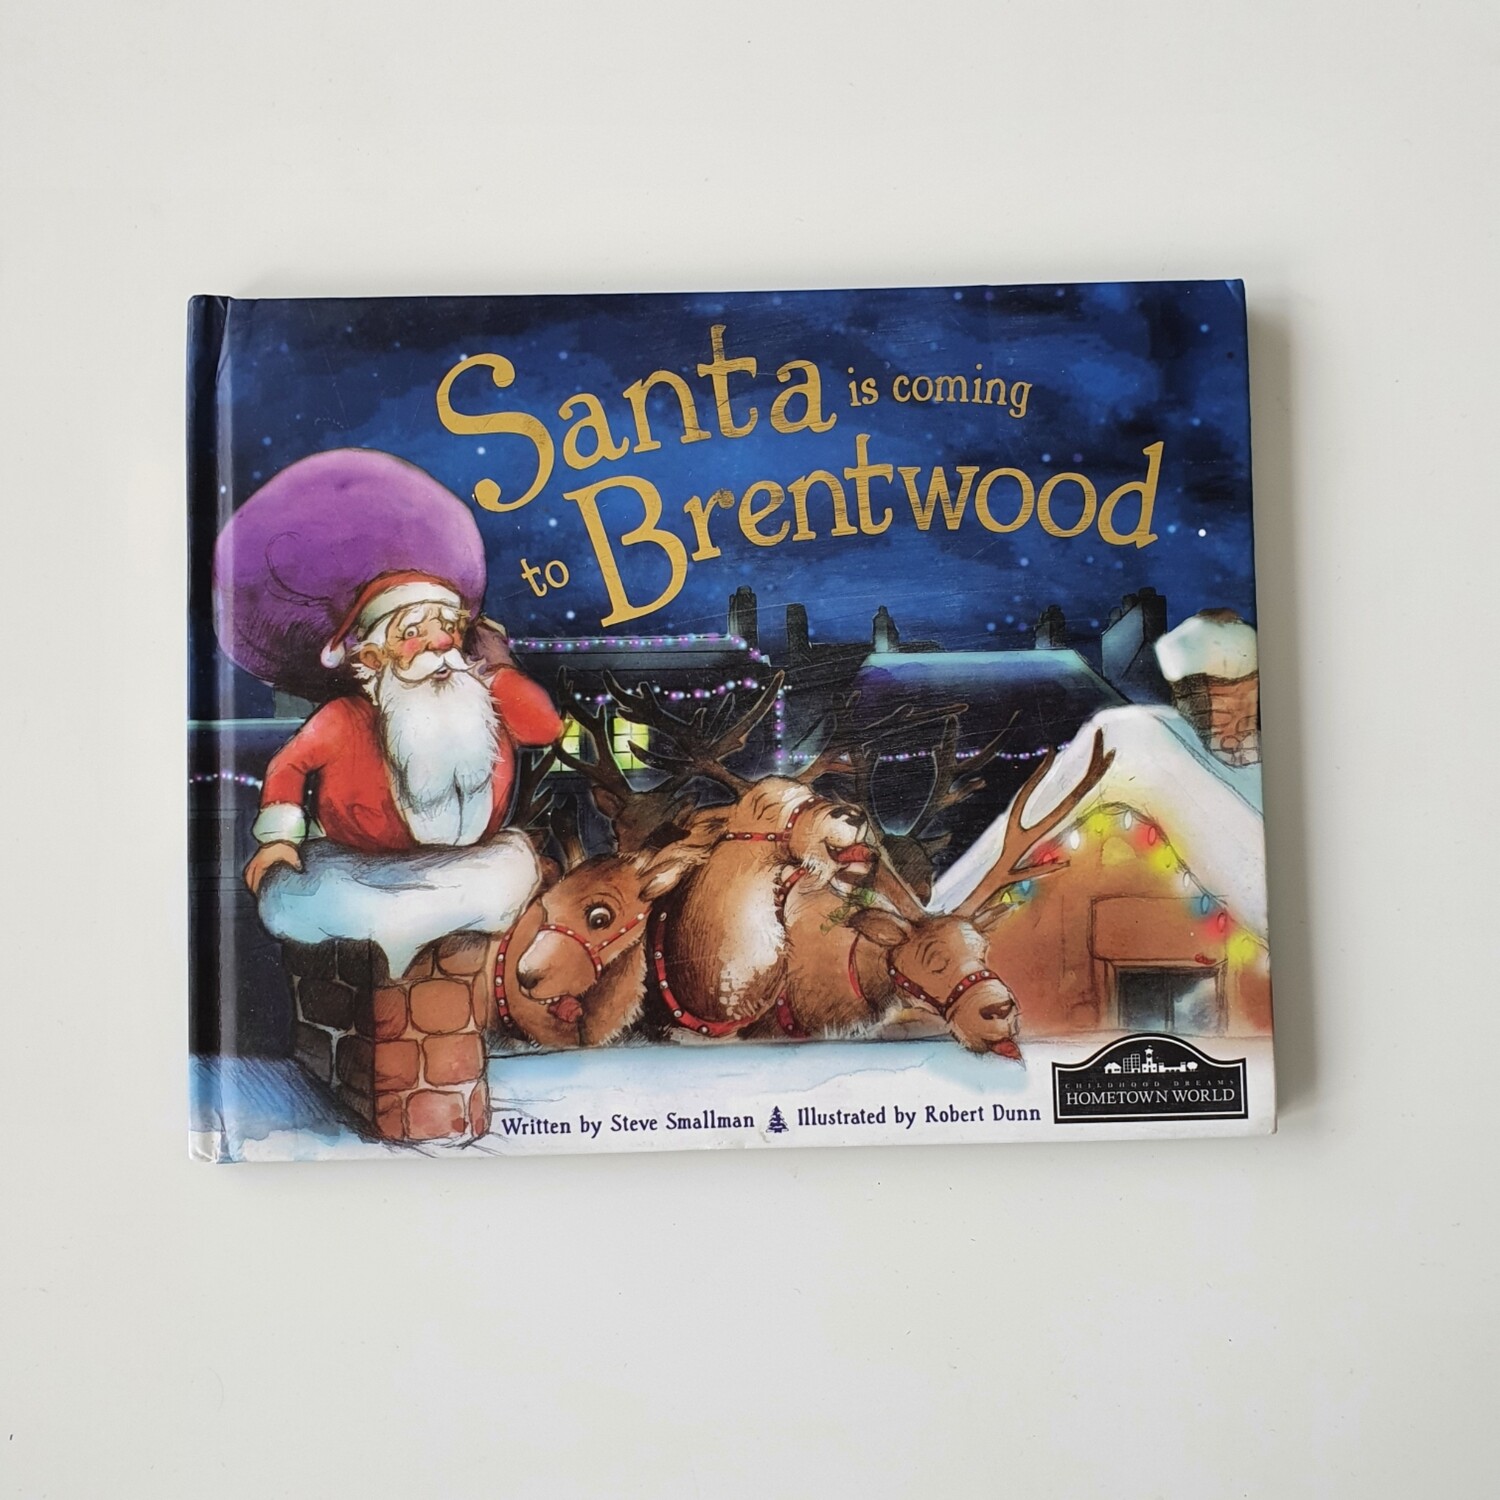 Santa is coming to Brentwood - Christmas